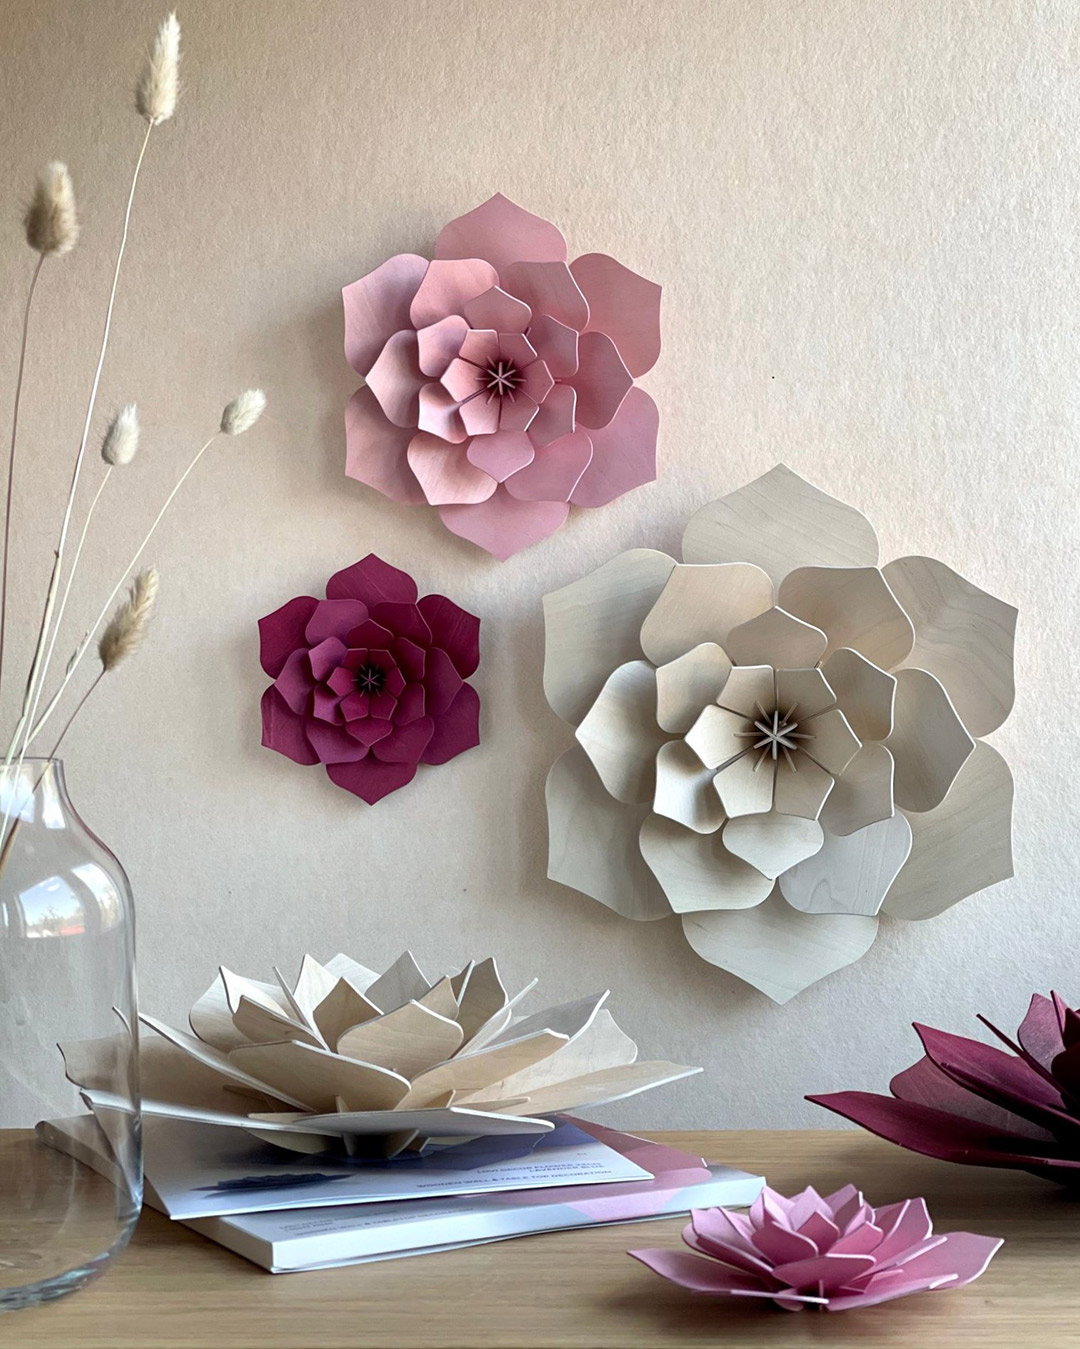 Lovi Decor Flowers on the wall and on table, sizes 48cm (natural wood), 34cm (light pink) and 24cm (dark red).